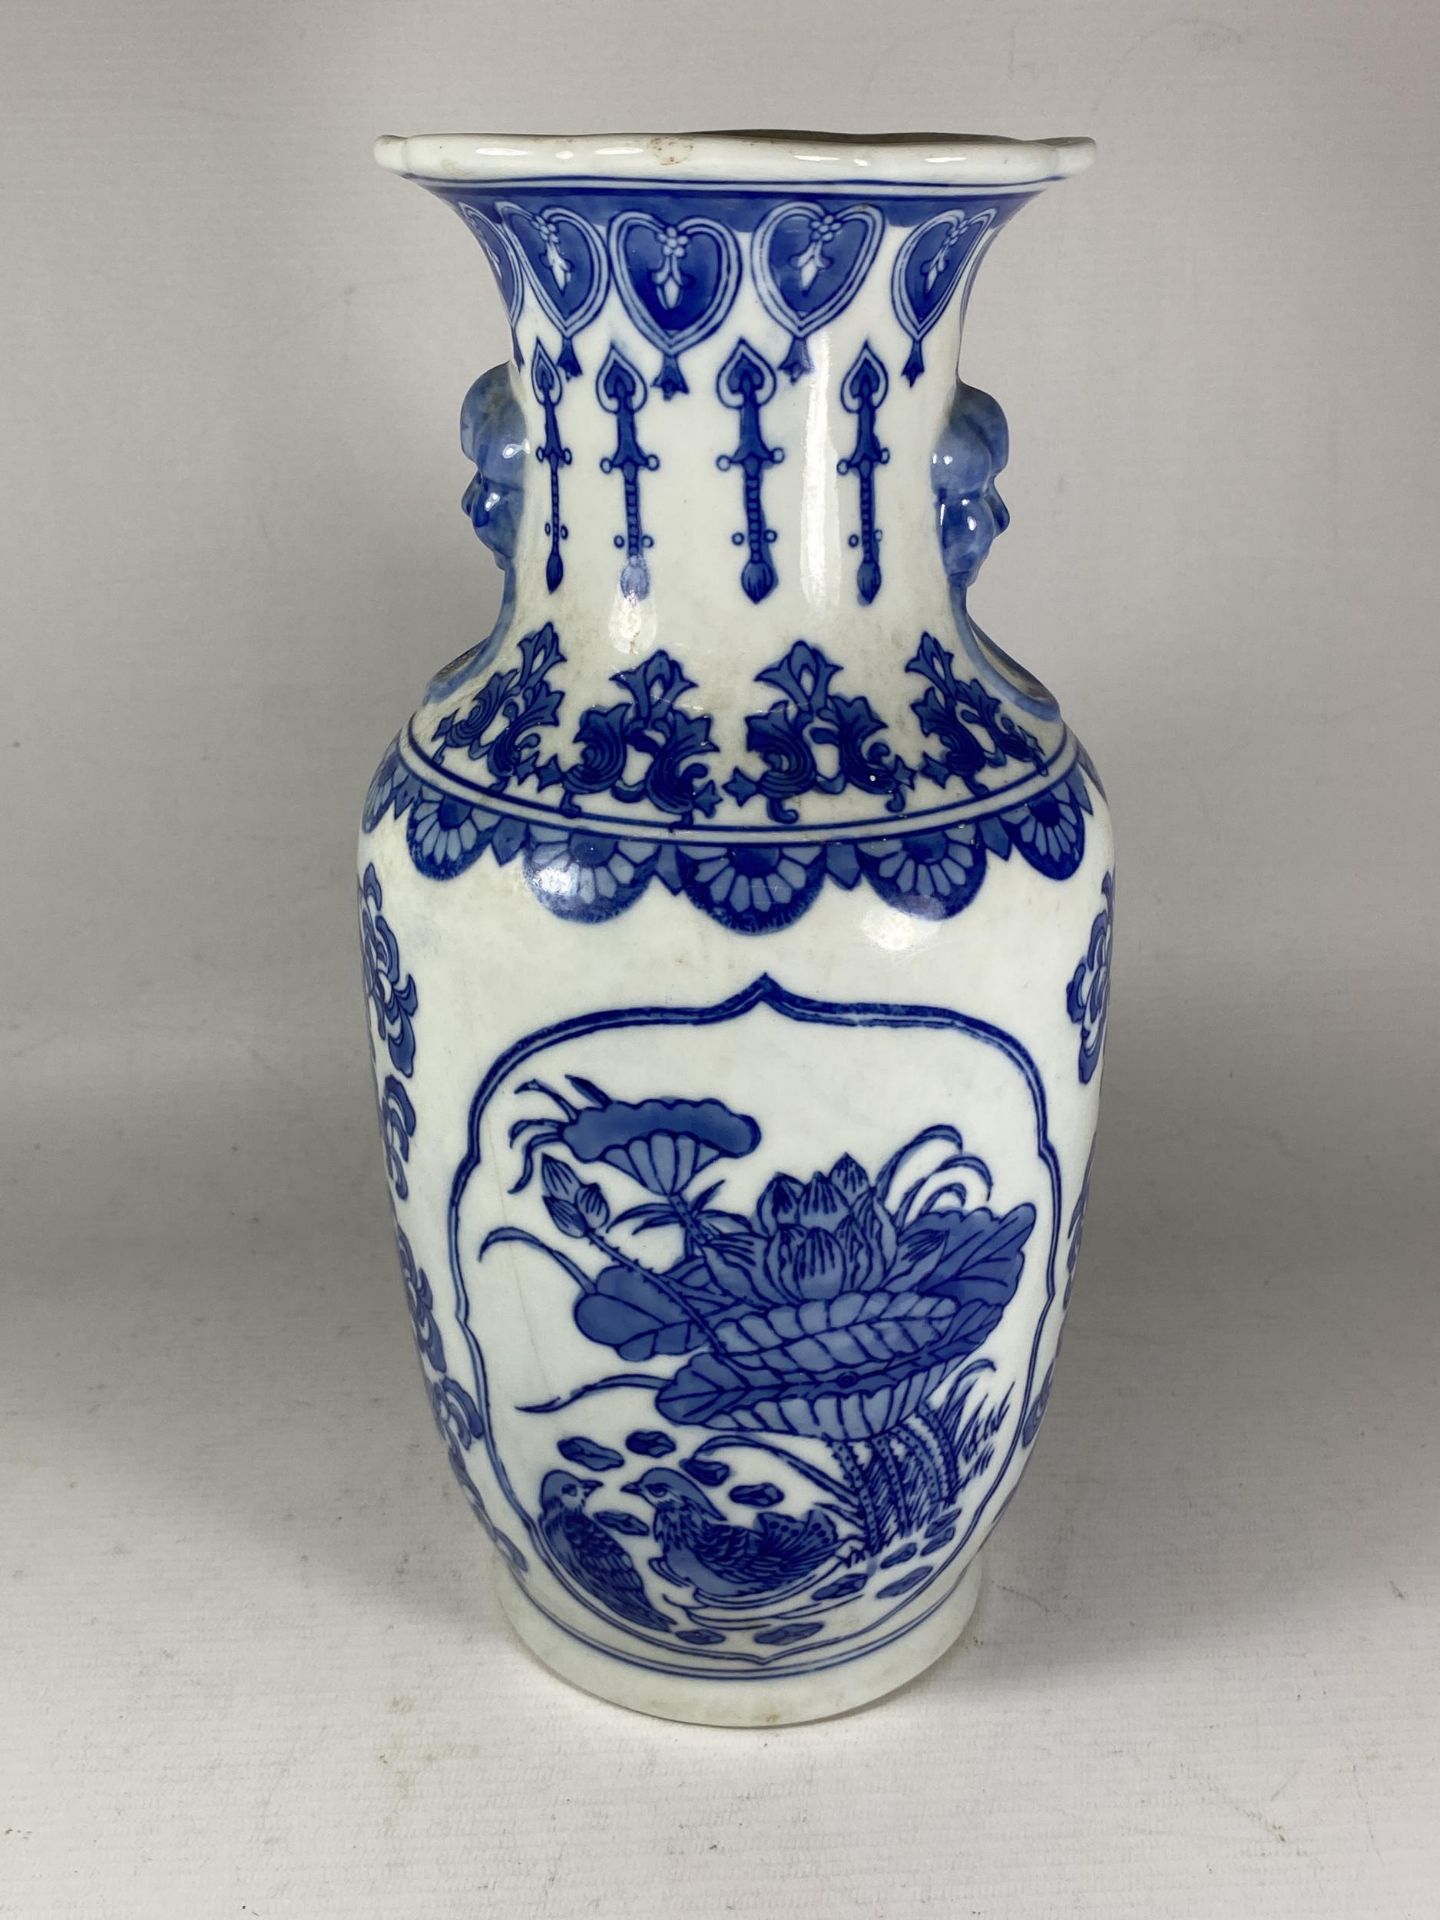 A 20TH CENTURY CHINESE BLUE AND WHITE FLORAL PATTERN VASE, HEIGHT 31CM